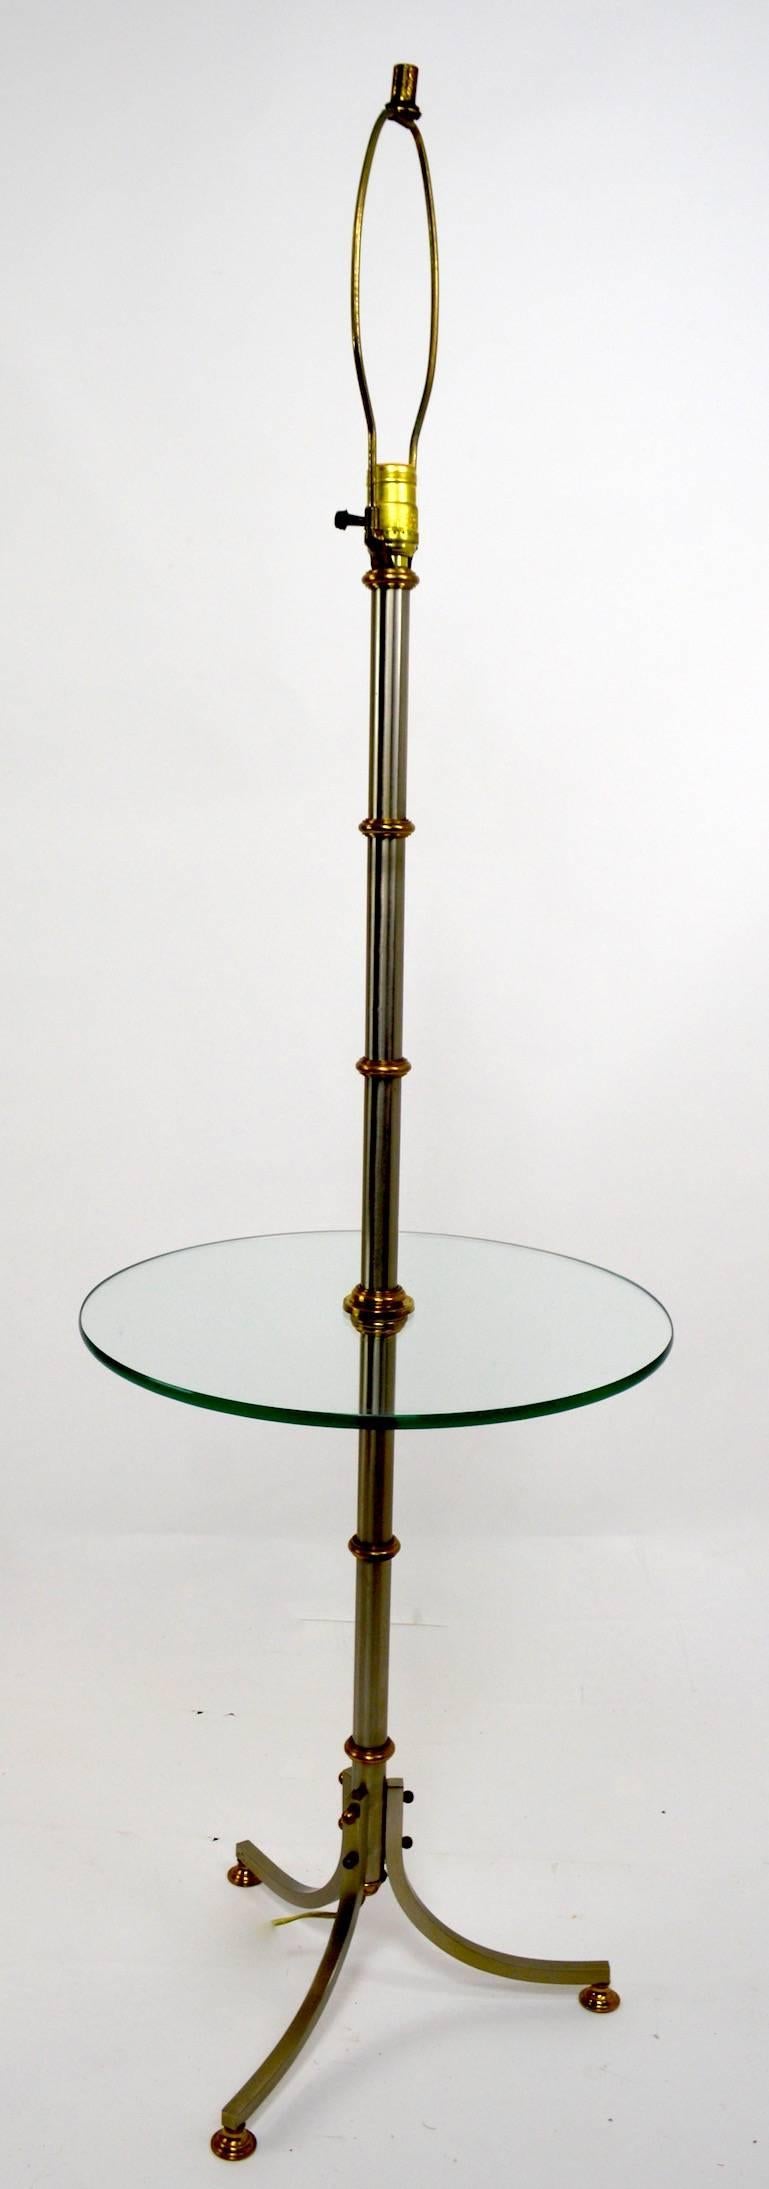 Floor lamp with glass shelf after Maison Jansen. Measures: Shelf height 21.5 inches, shelf diameter 16 inches.